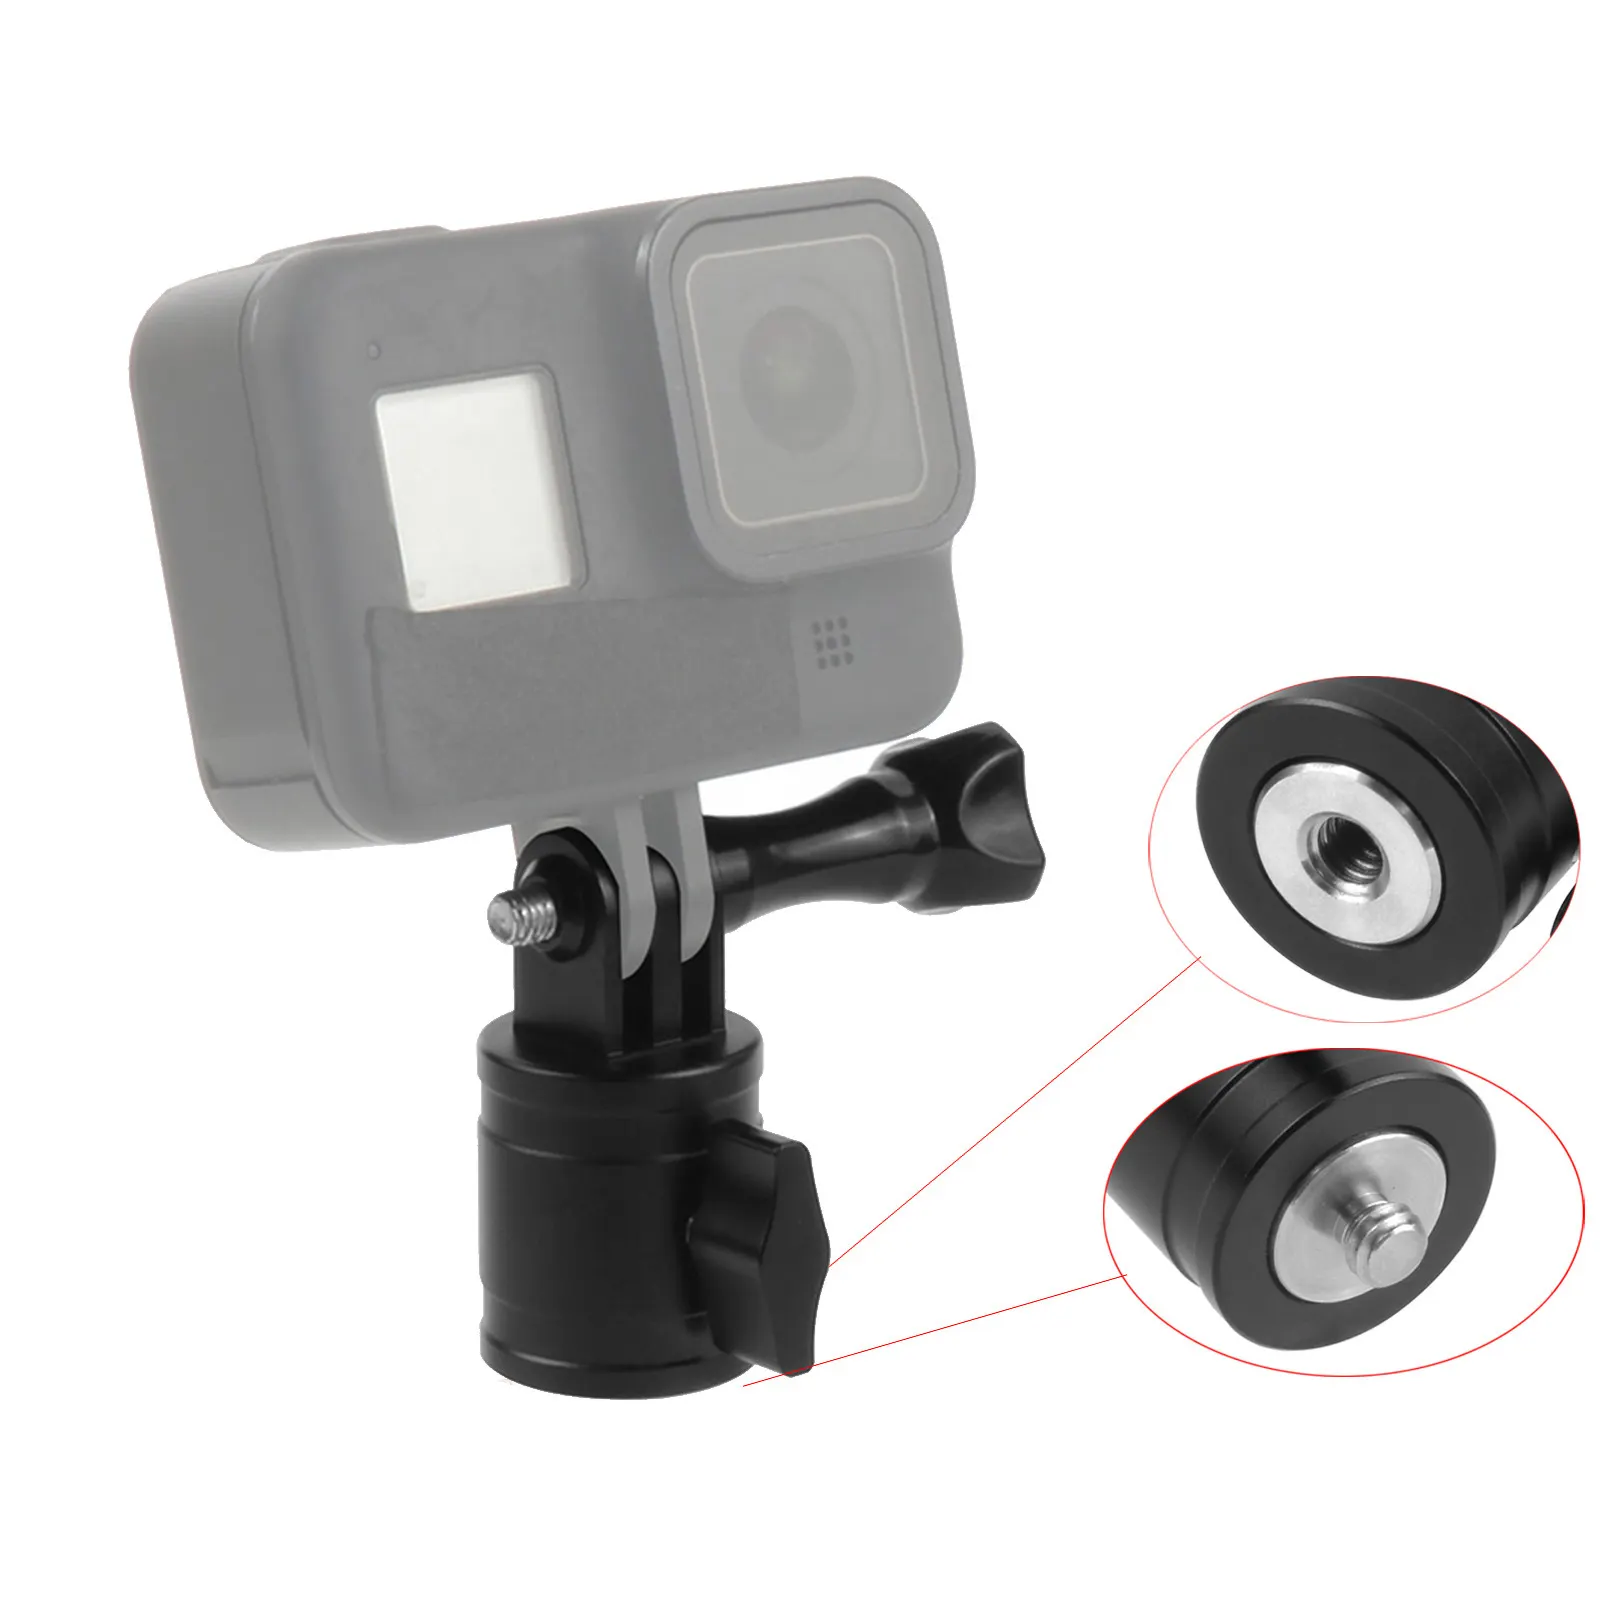 Tripod Adapter Mount for GoPro 10 /Insta 360 1/4 inch Aluminium Mounting Accessories with 360 Degree Swivel Pivot Arm Connector